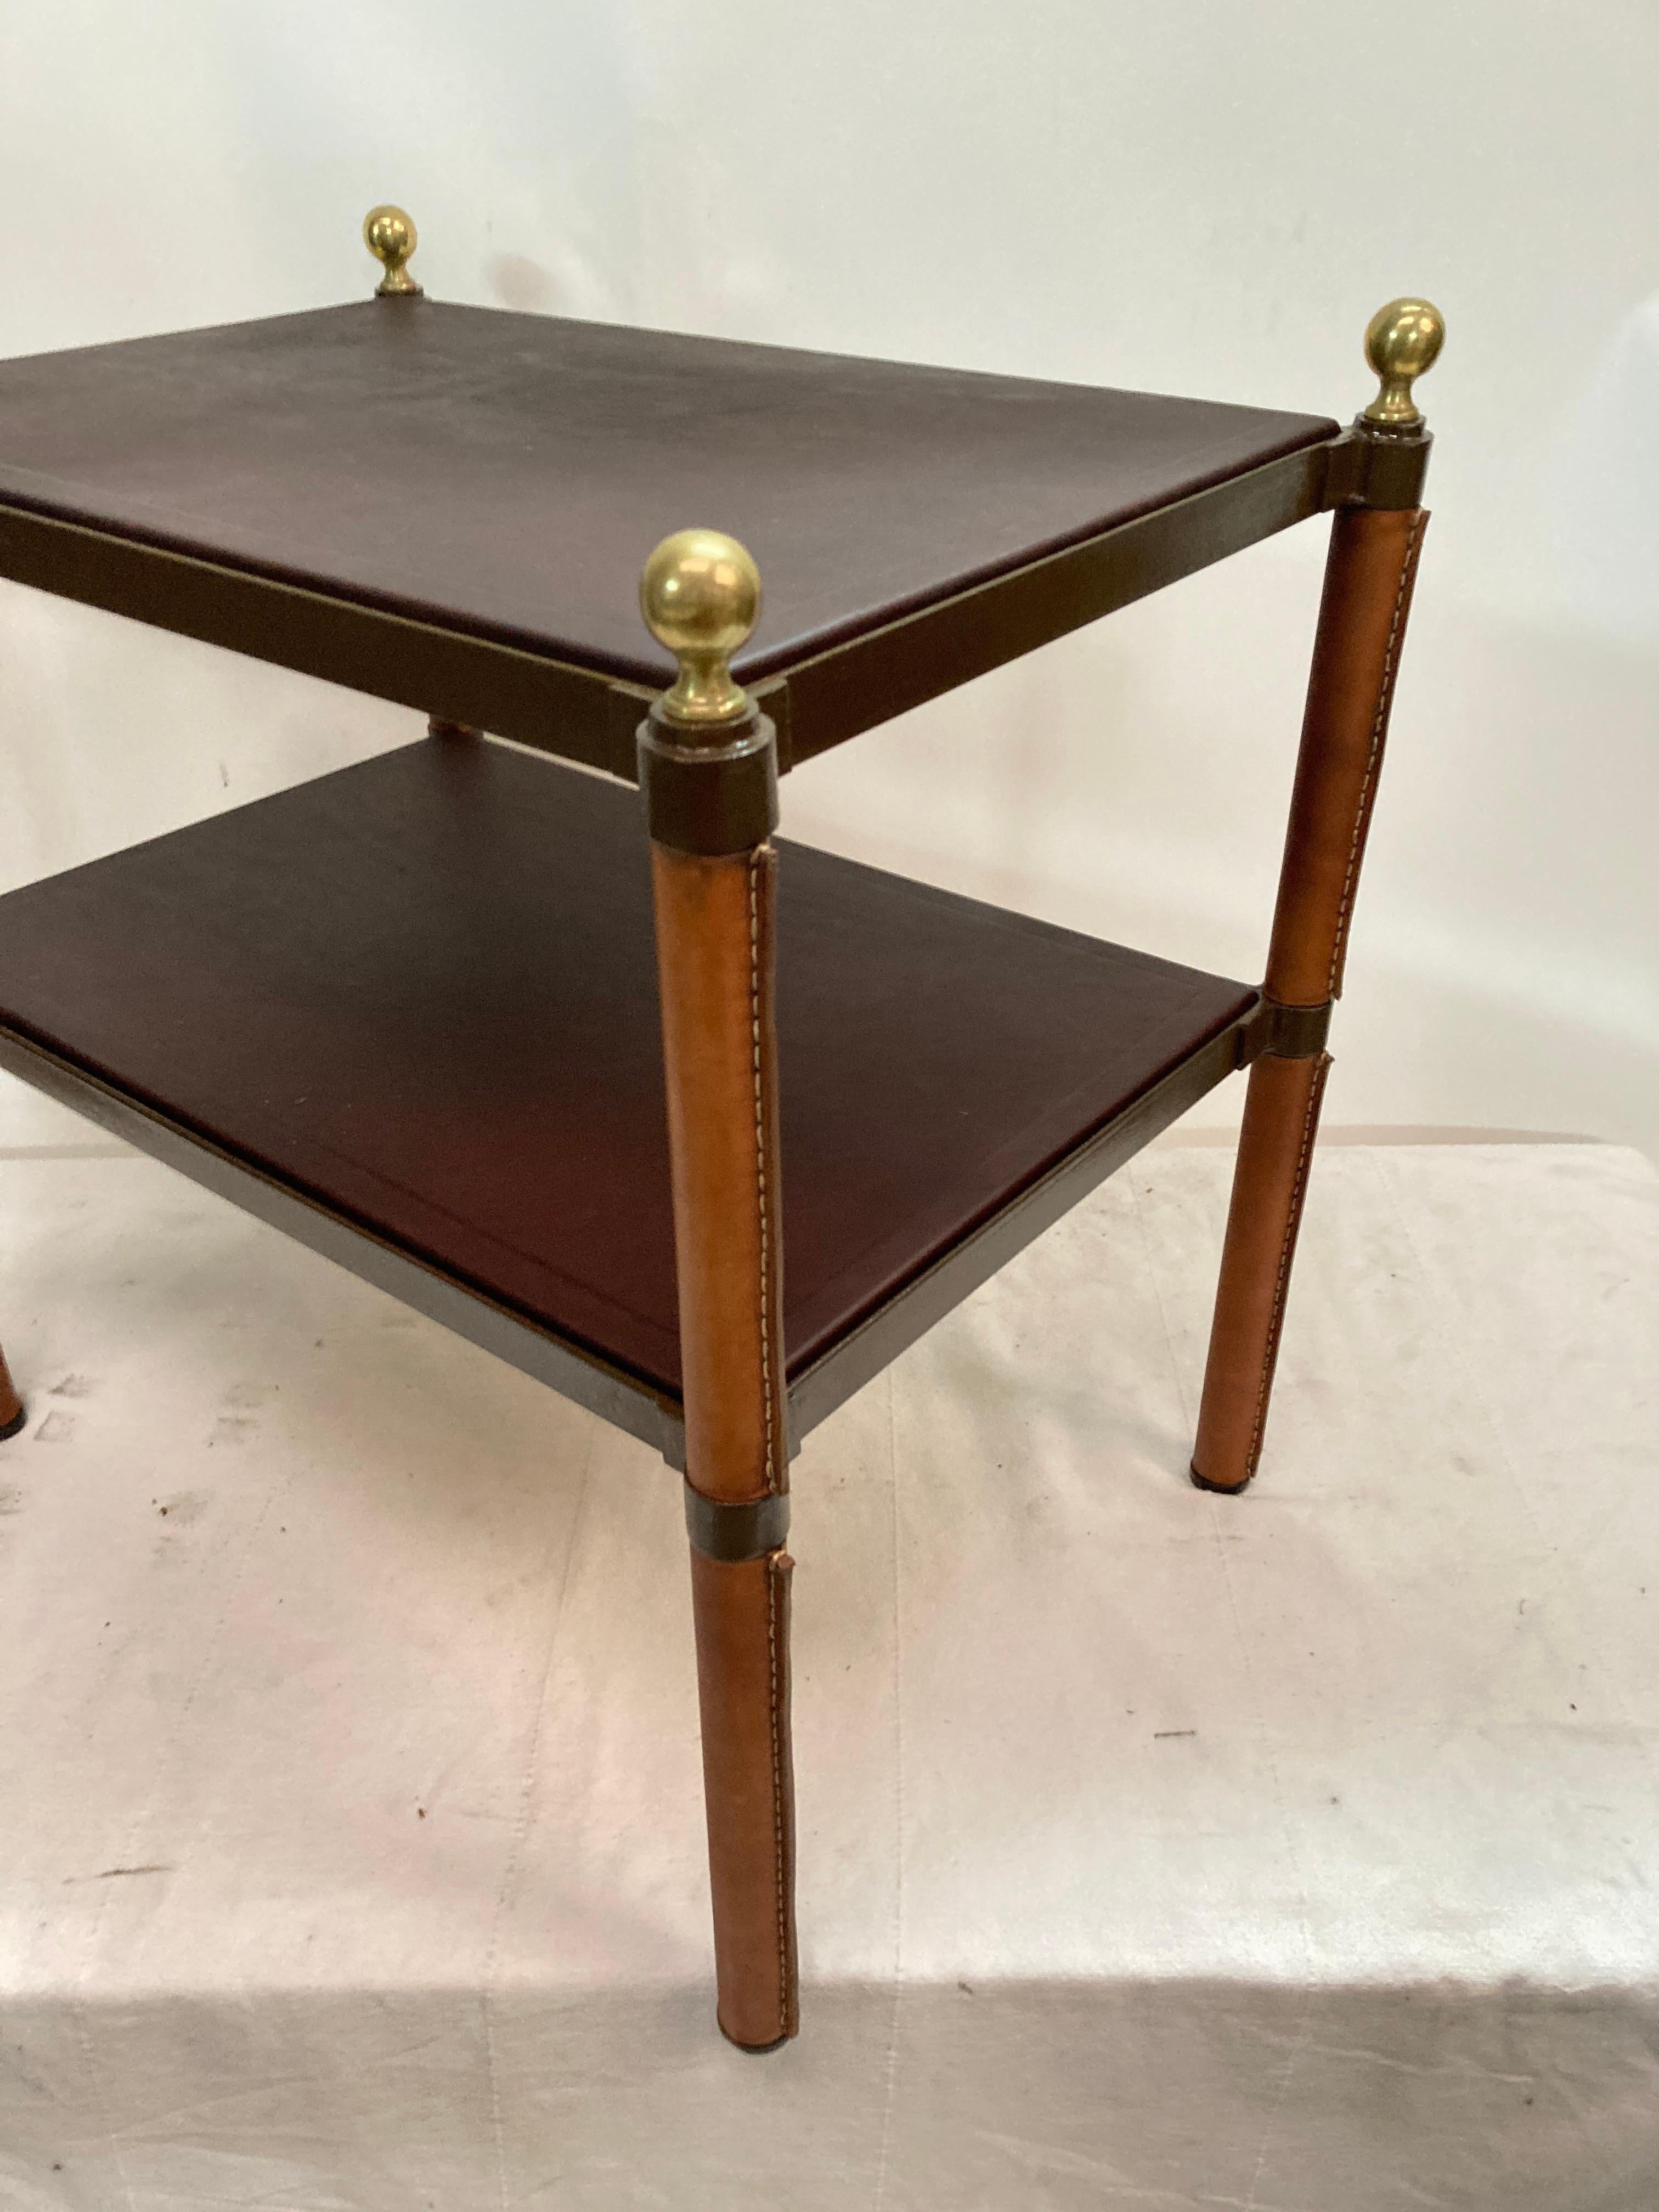 1950's Pair of stitched leather side tables.
2 level covered with chocolate leather 
Bronze balls at each corner
Grood condition